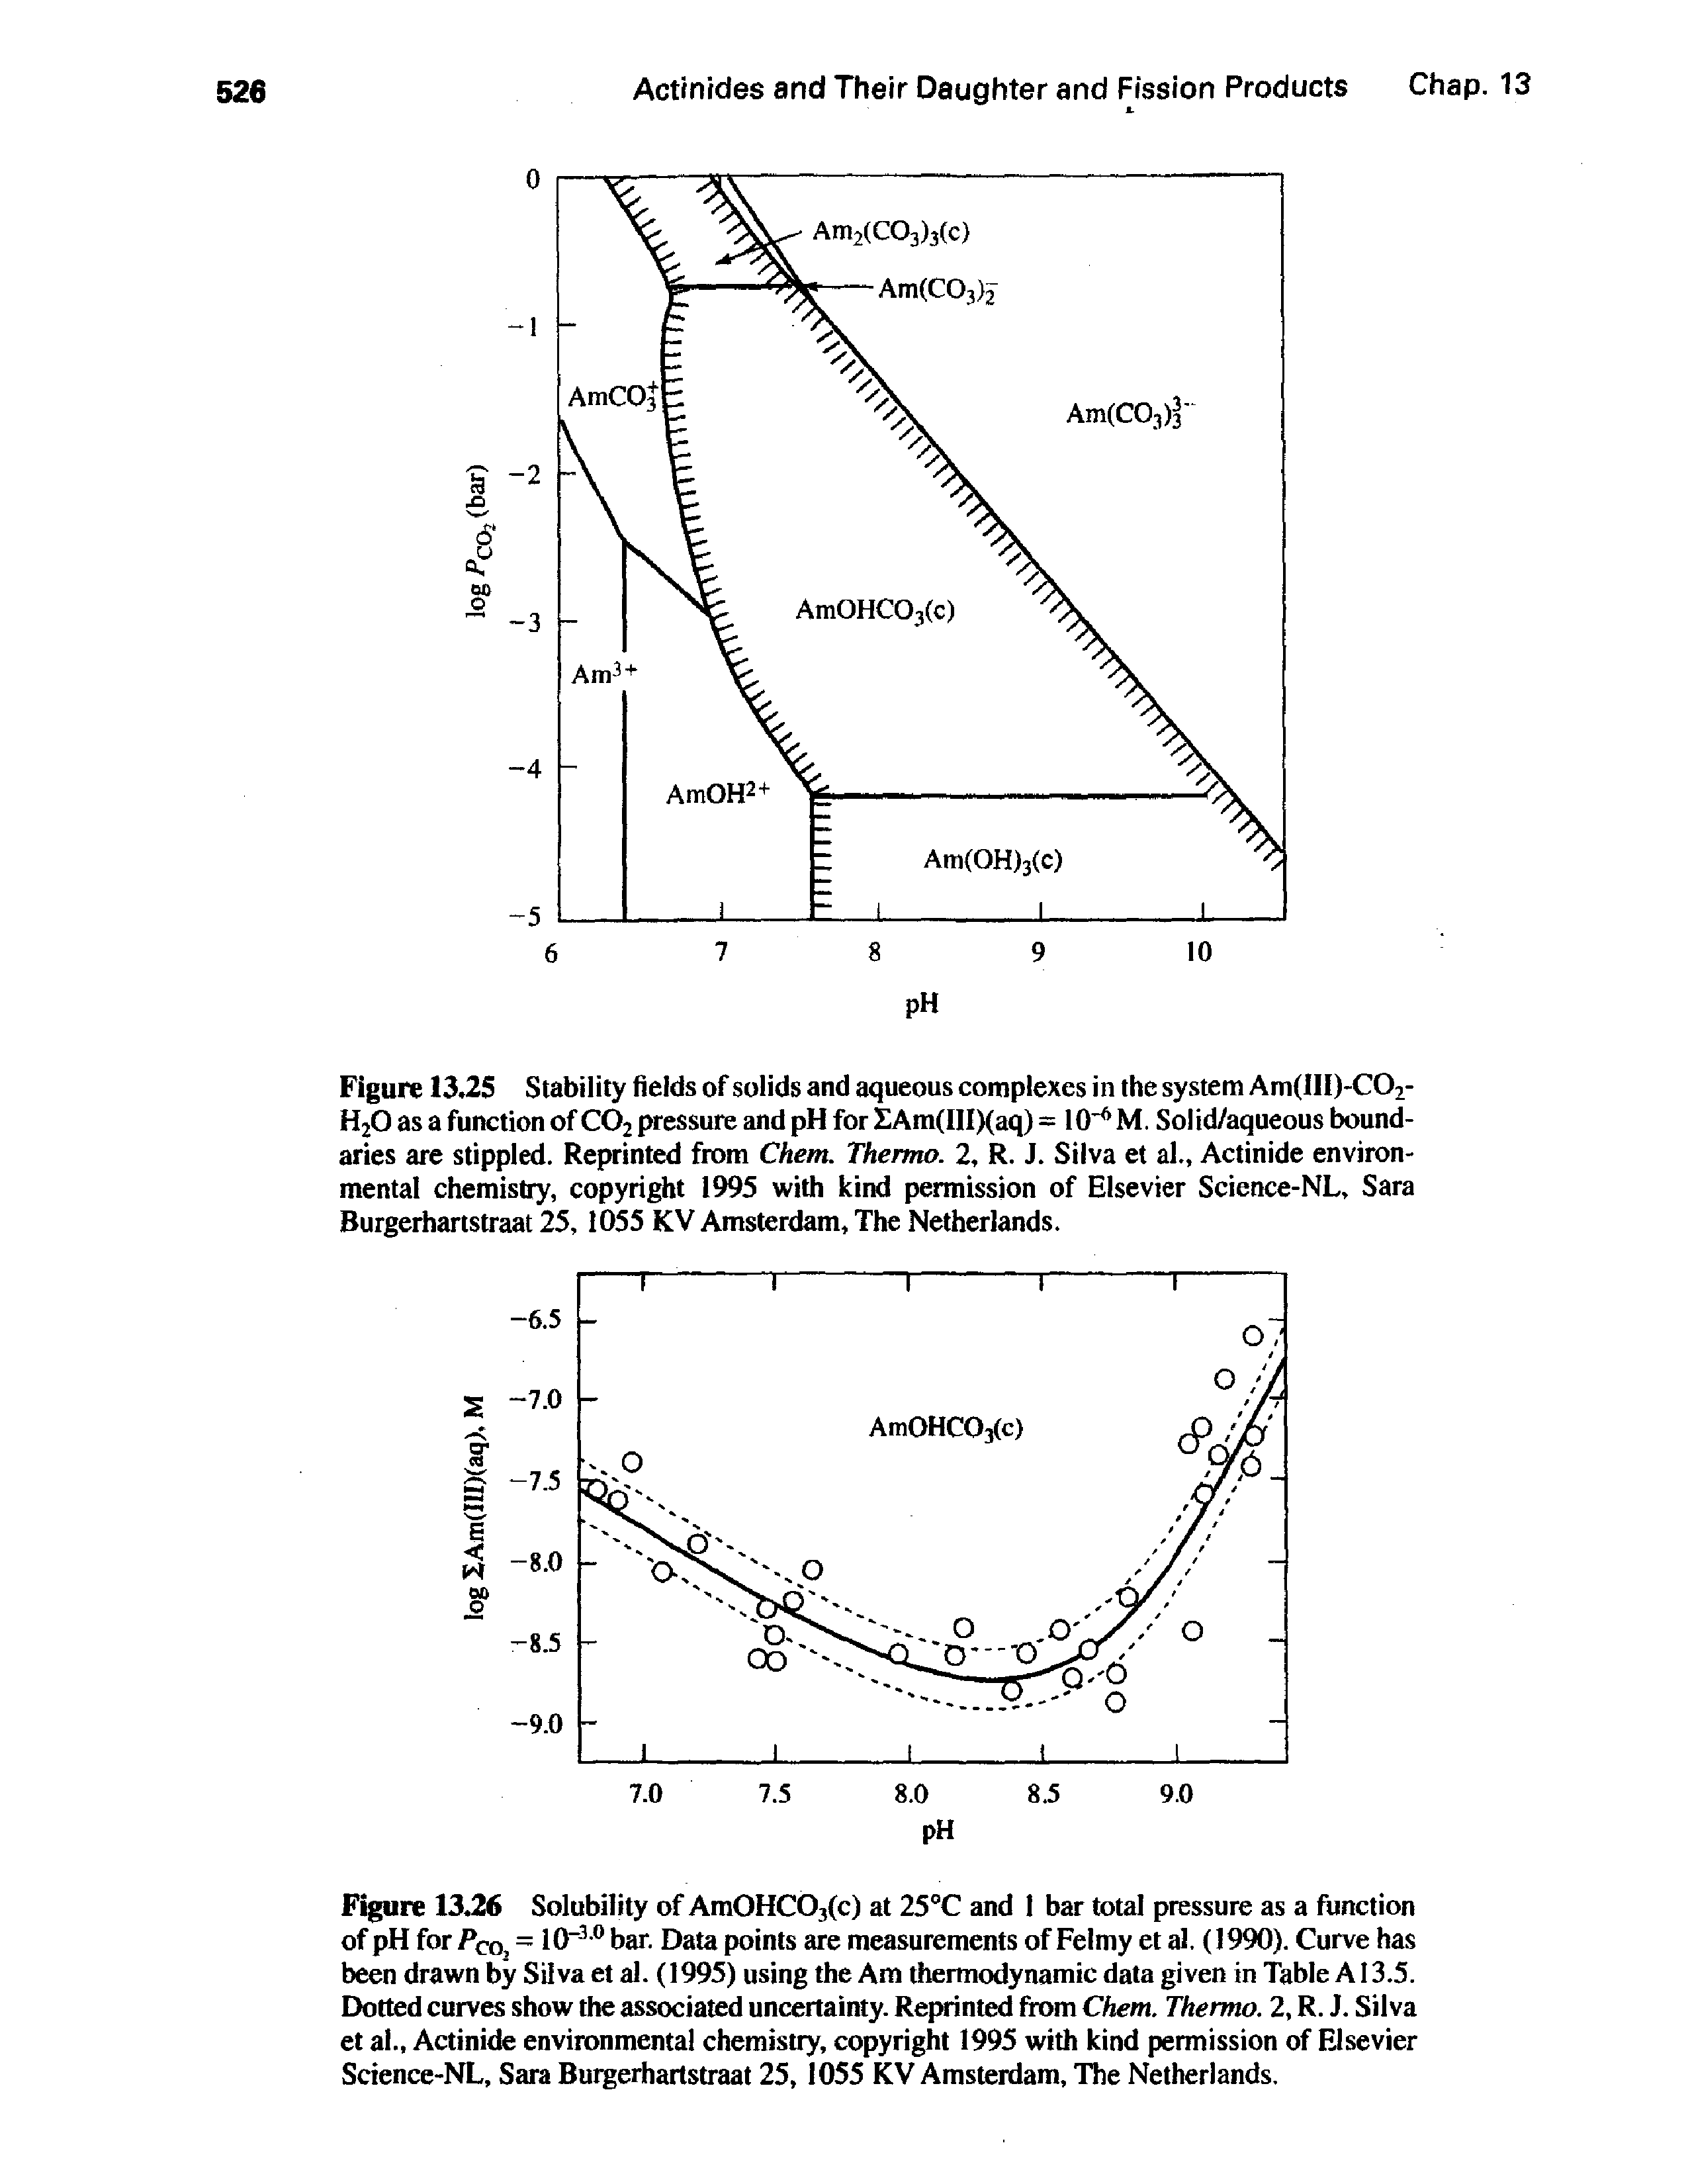 Figure 13.26 Solubility of Ara0HC03(c) at 25°C and 1 bar total pressure as a function of pH for Pco, = lO" bar. Data points are measurements of Felmy et al. (1990). Curve has been drawn by Silva et al. (1995) using the Am thermodynamic data given in Table A13.5. >otted curves show the associated uncertainty. Reprinted fiom Chem. Thermo. 2, R. J. Silva et al., Actinide environmental chemistry, copyright 1995 with kind permission of Elsevier Science-NL, Sara Burgerhartstraat 25, 1055 KV Amsterdam, The Netherlands.